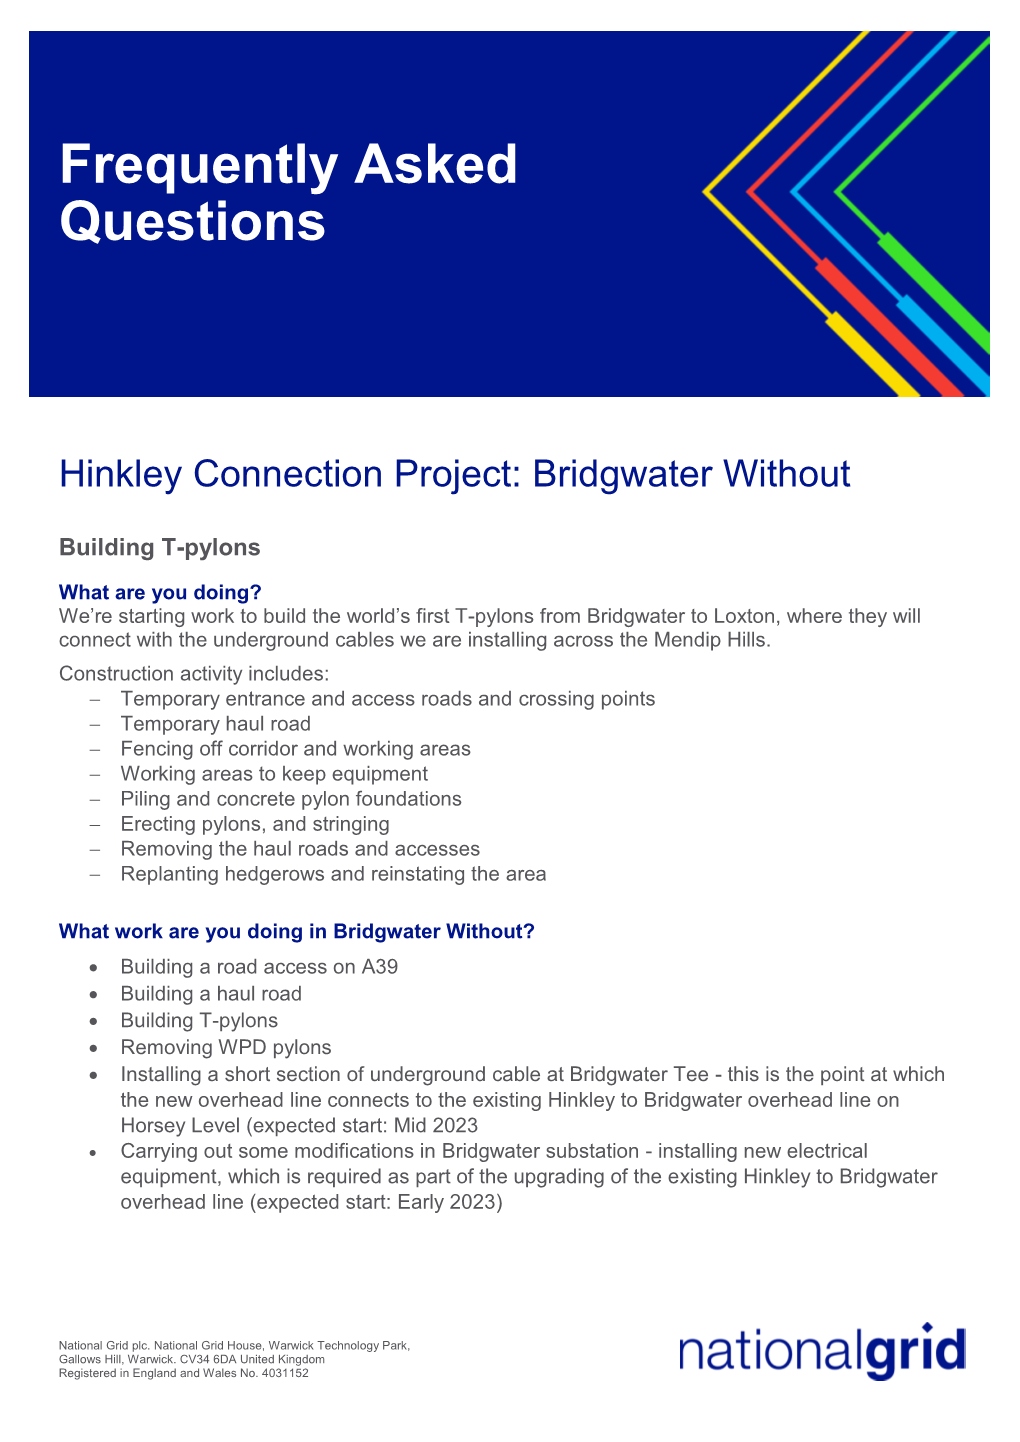 Bridgwater Without FAQ May 2020